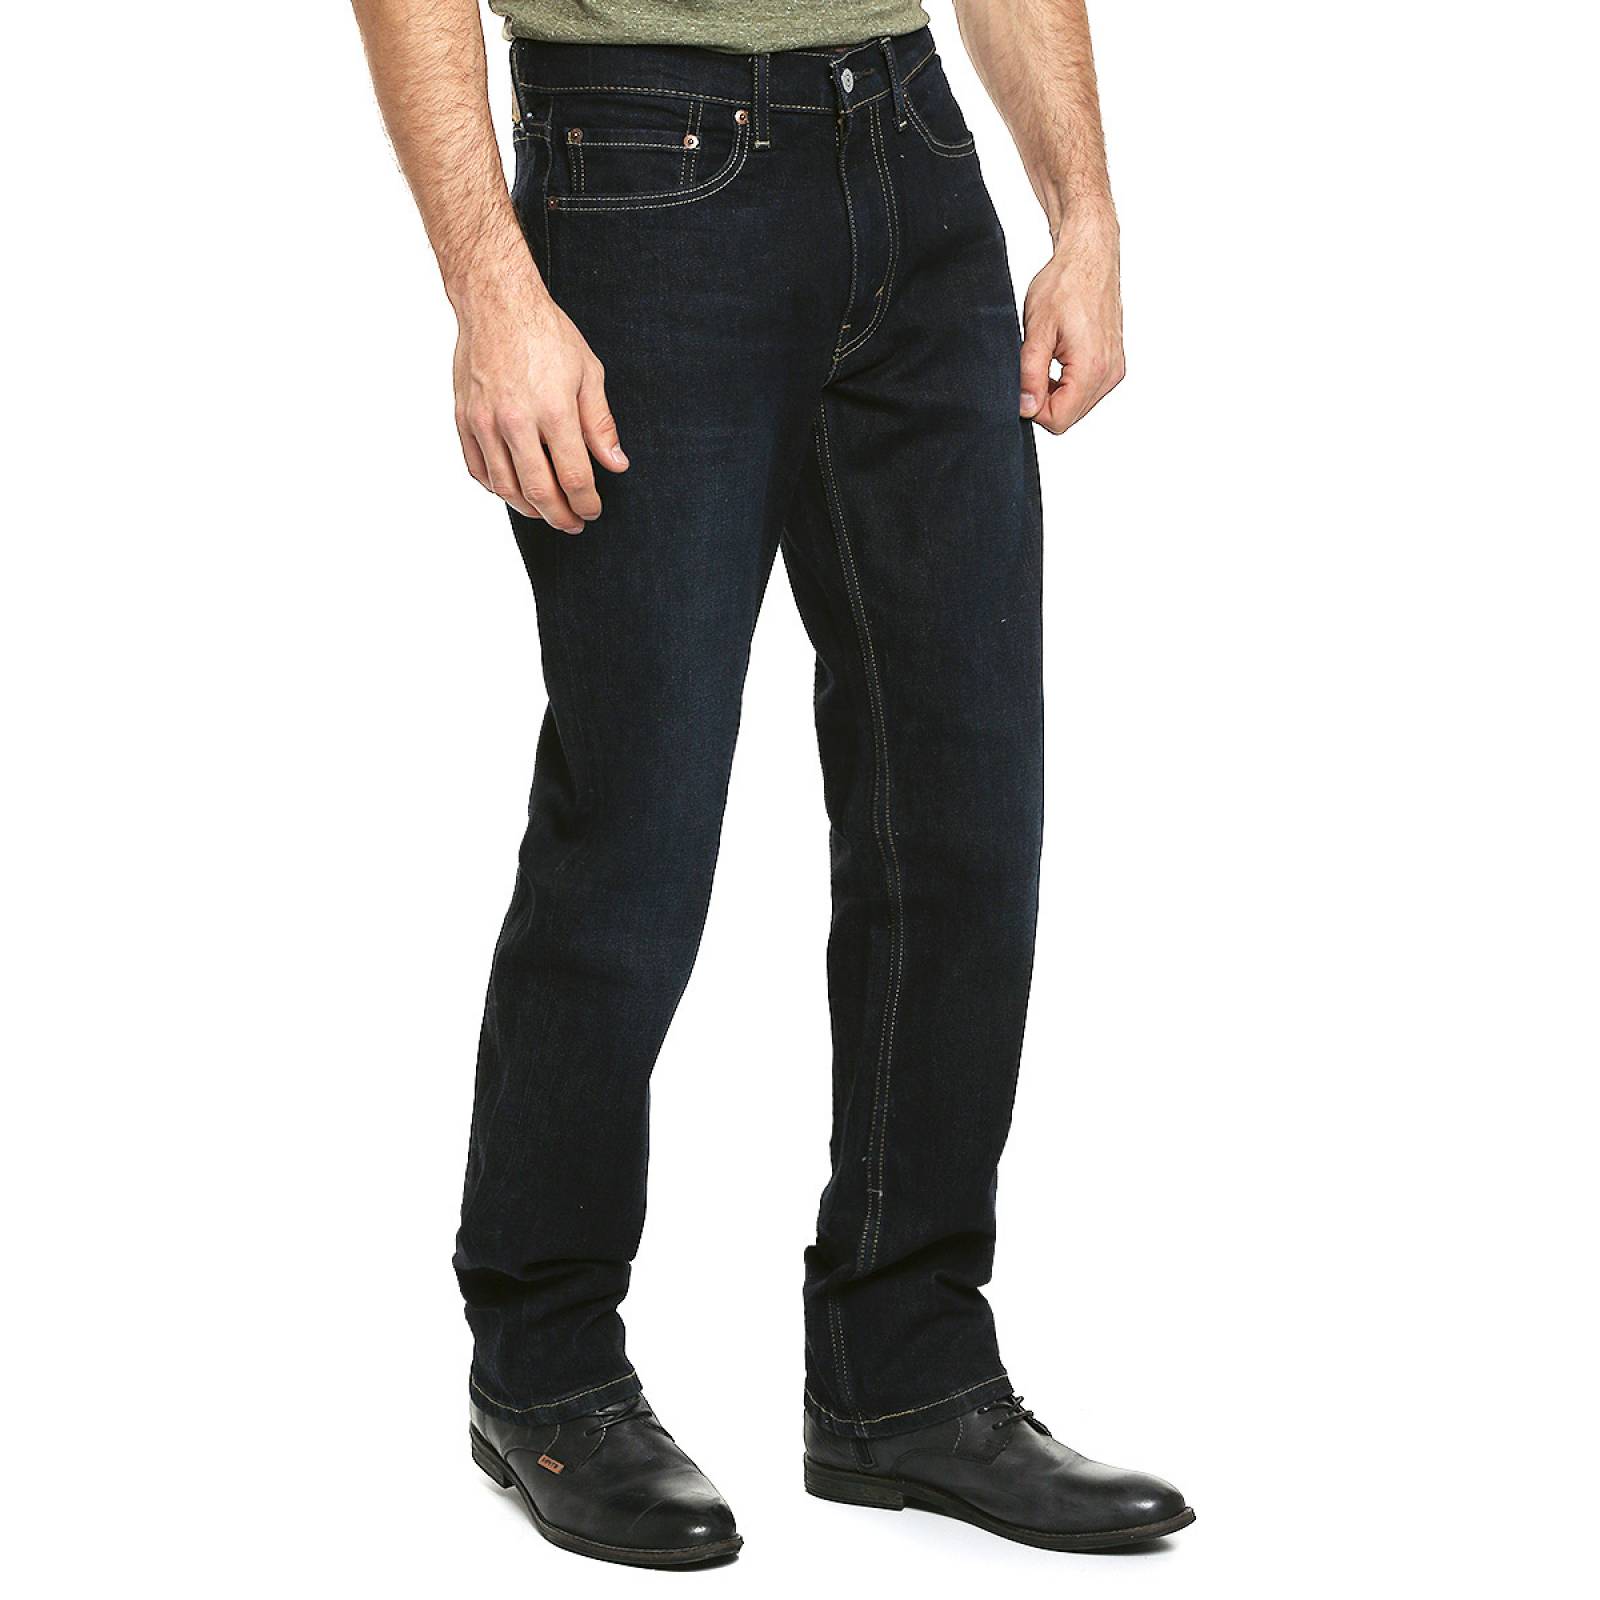 Jeans 514 Aight para Caballero